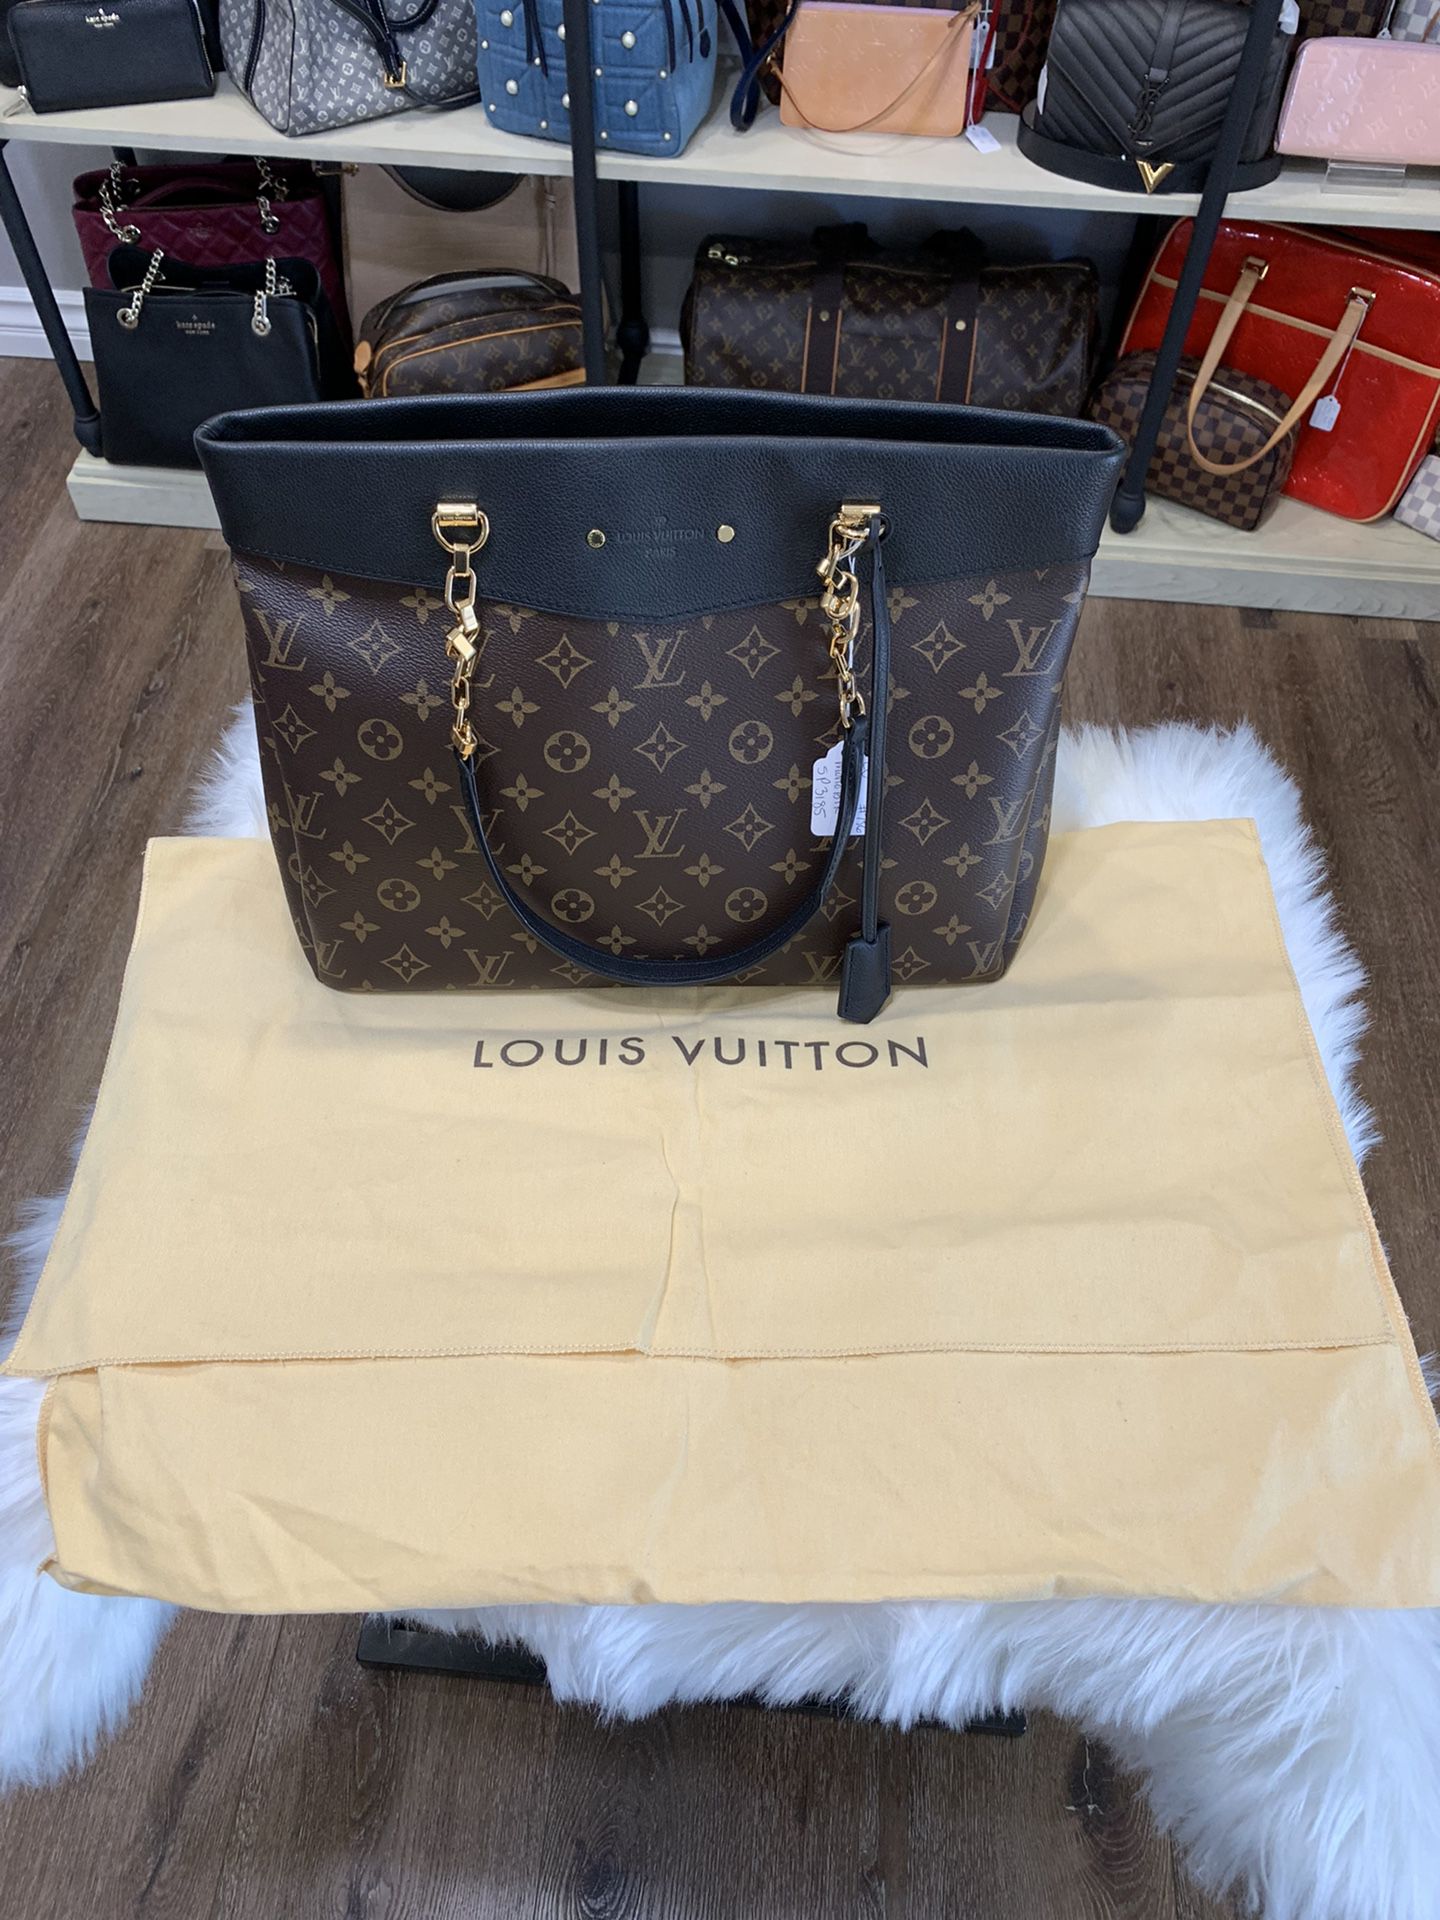 Louis Vuitton Petite Malle Bags for Sale in Los Angeles, CA - OfferUp